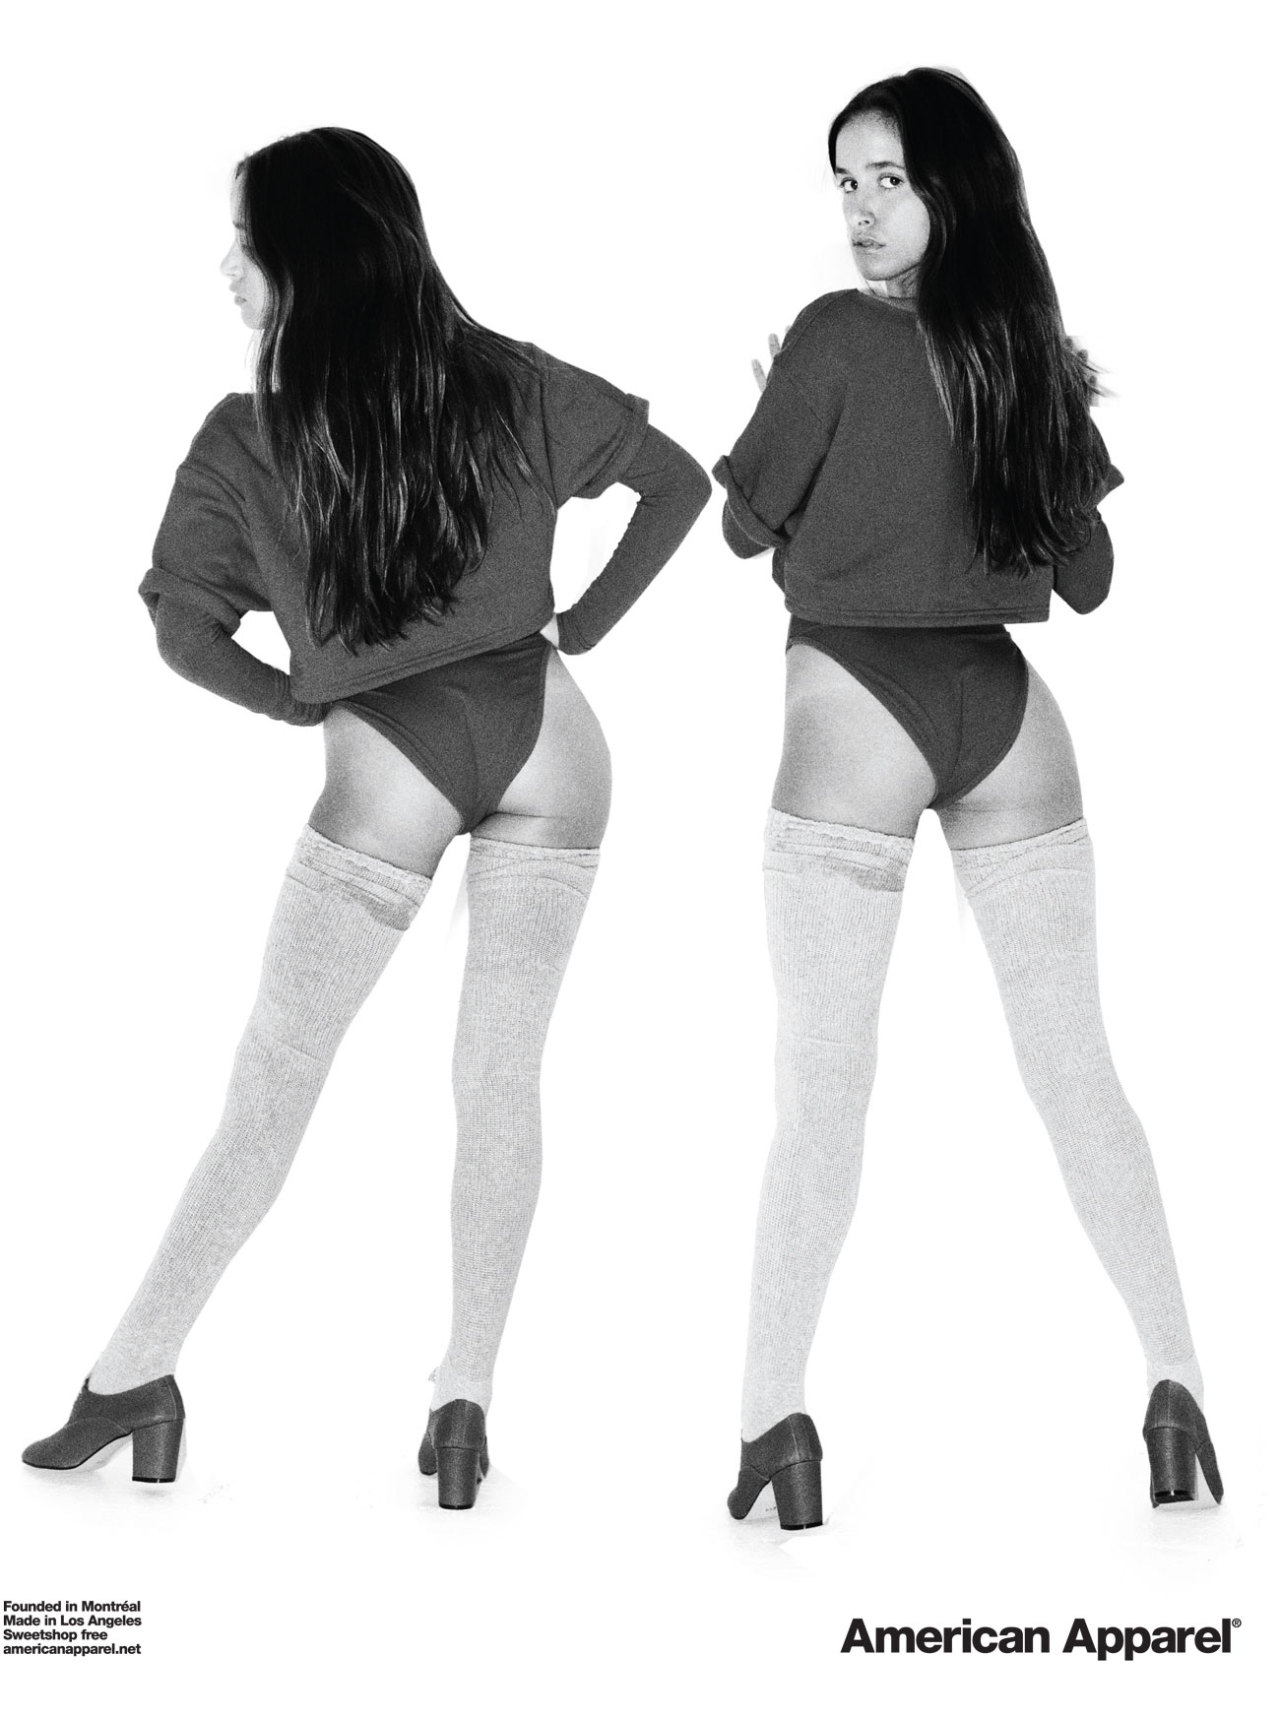 American Apparel sexy advert. American Apparel&rsquo;s advertising is famous